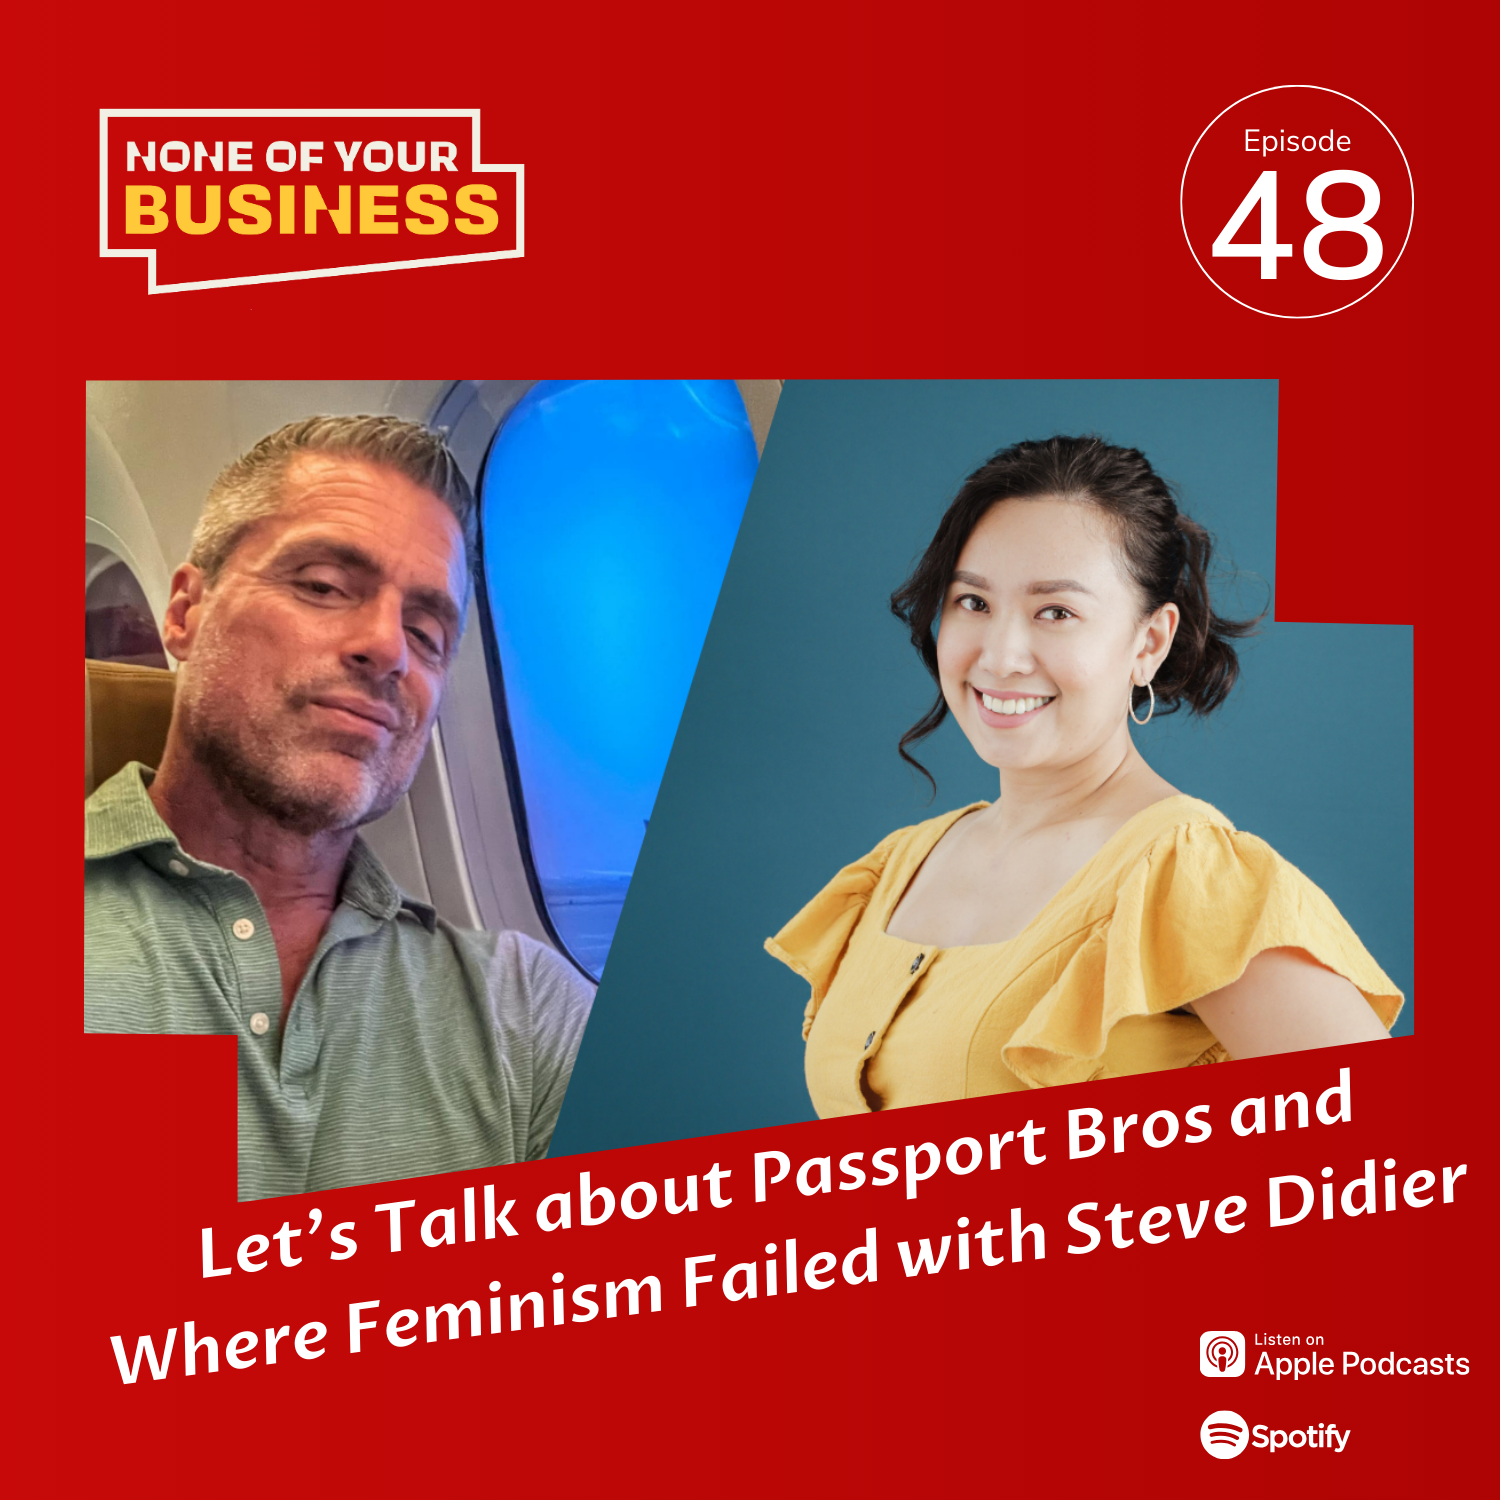 Let's Talk About Passport Bros and Where Feminism Failed with Steve Didier